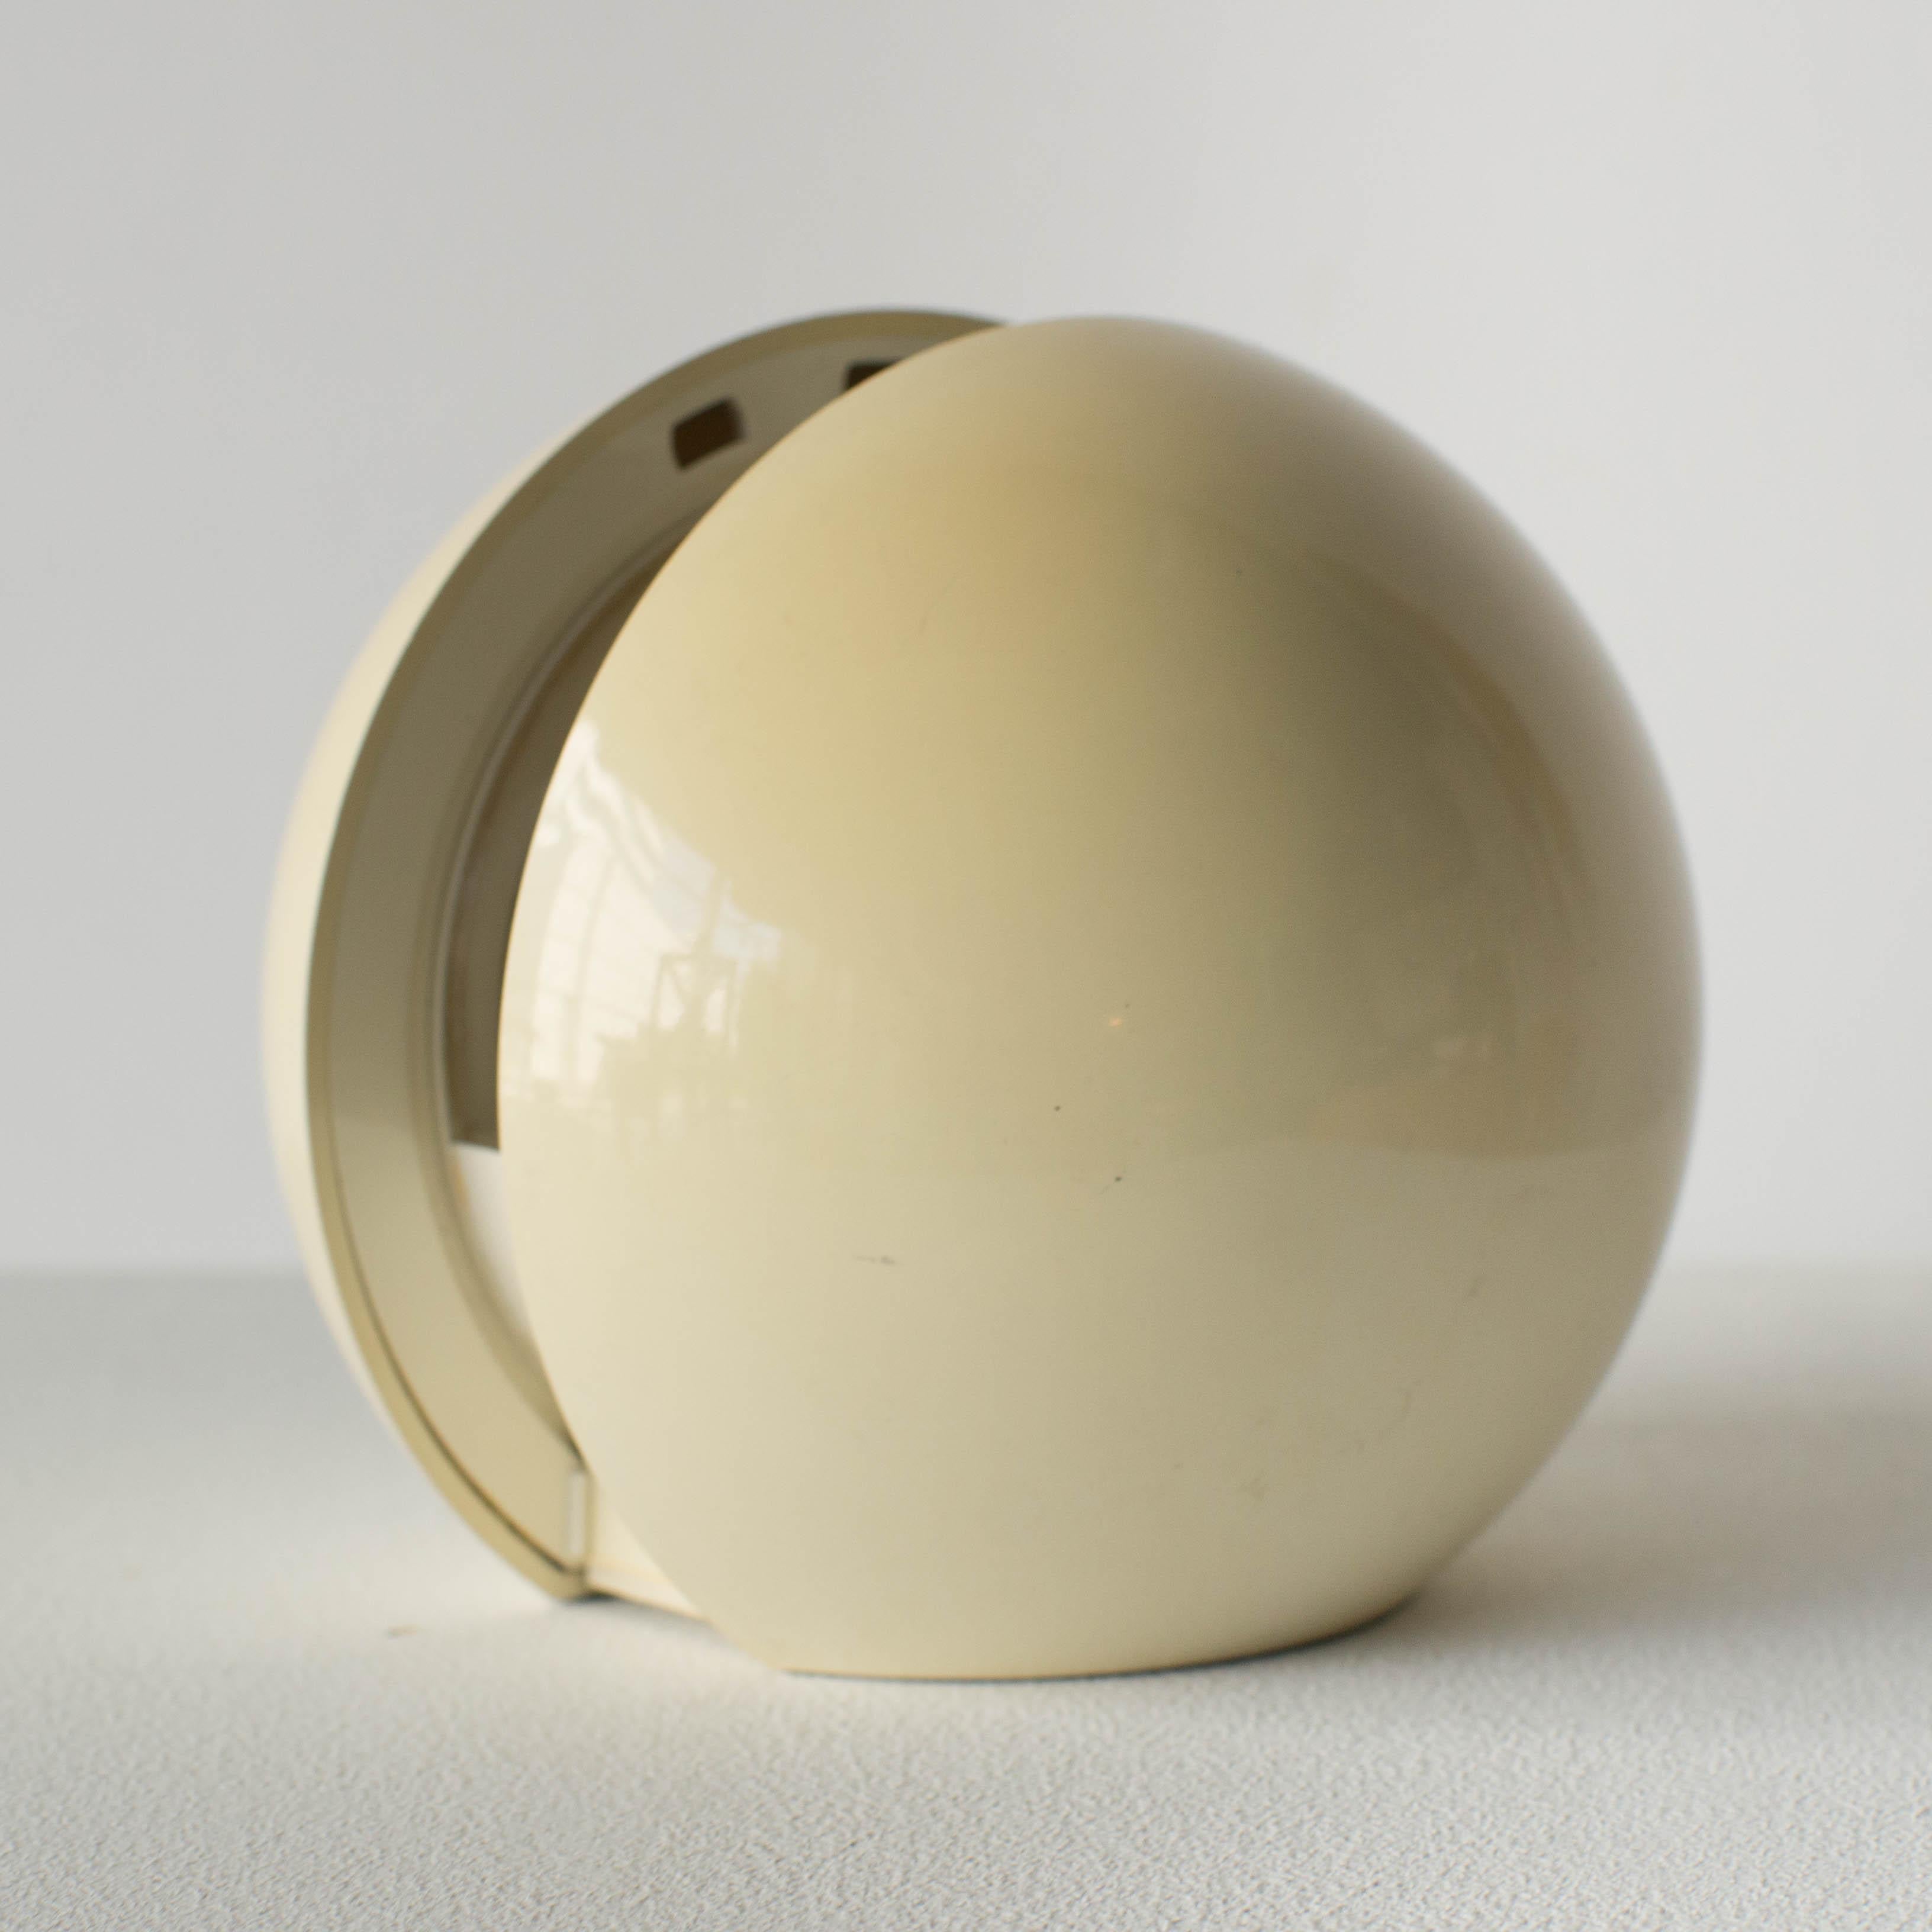 Gea lamp by Italian artist Gianni Colombo for Arredoluce.
There is a shade to adjust light at the centre of the ball. White color, a little sunned.
 